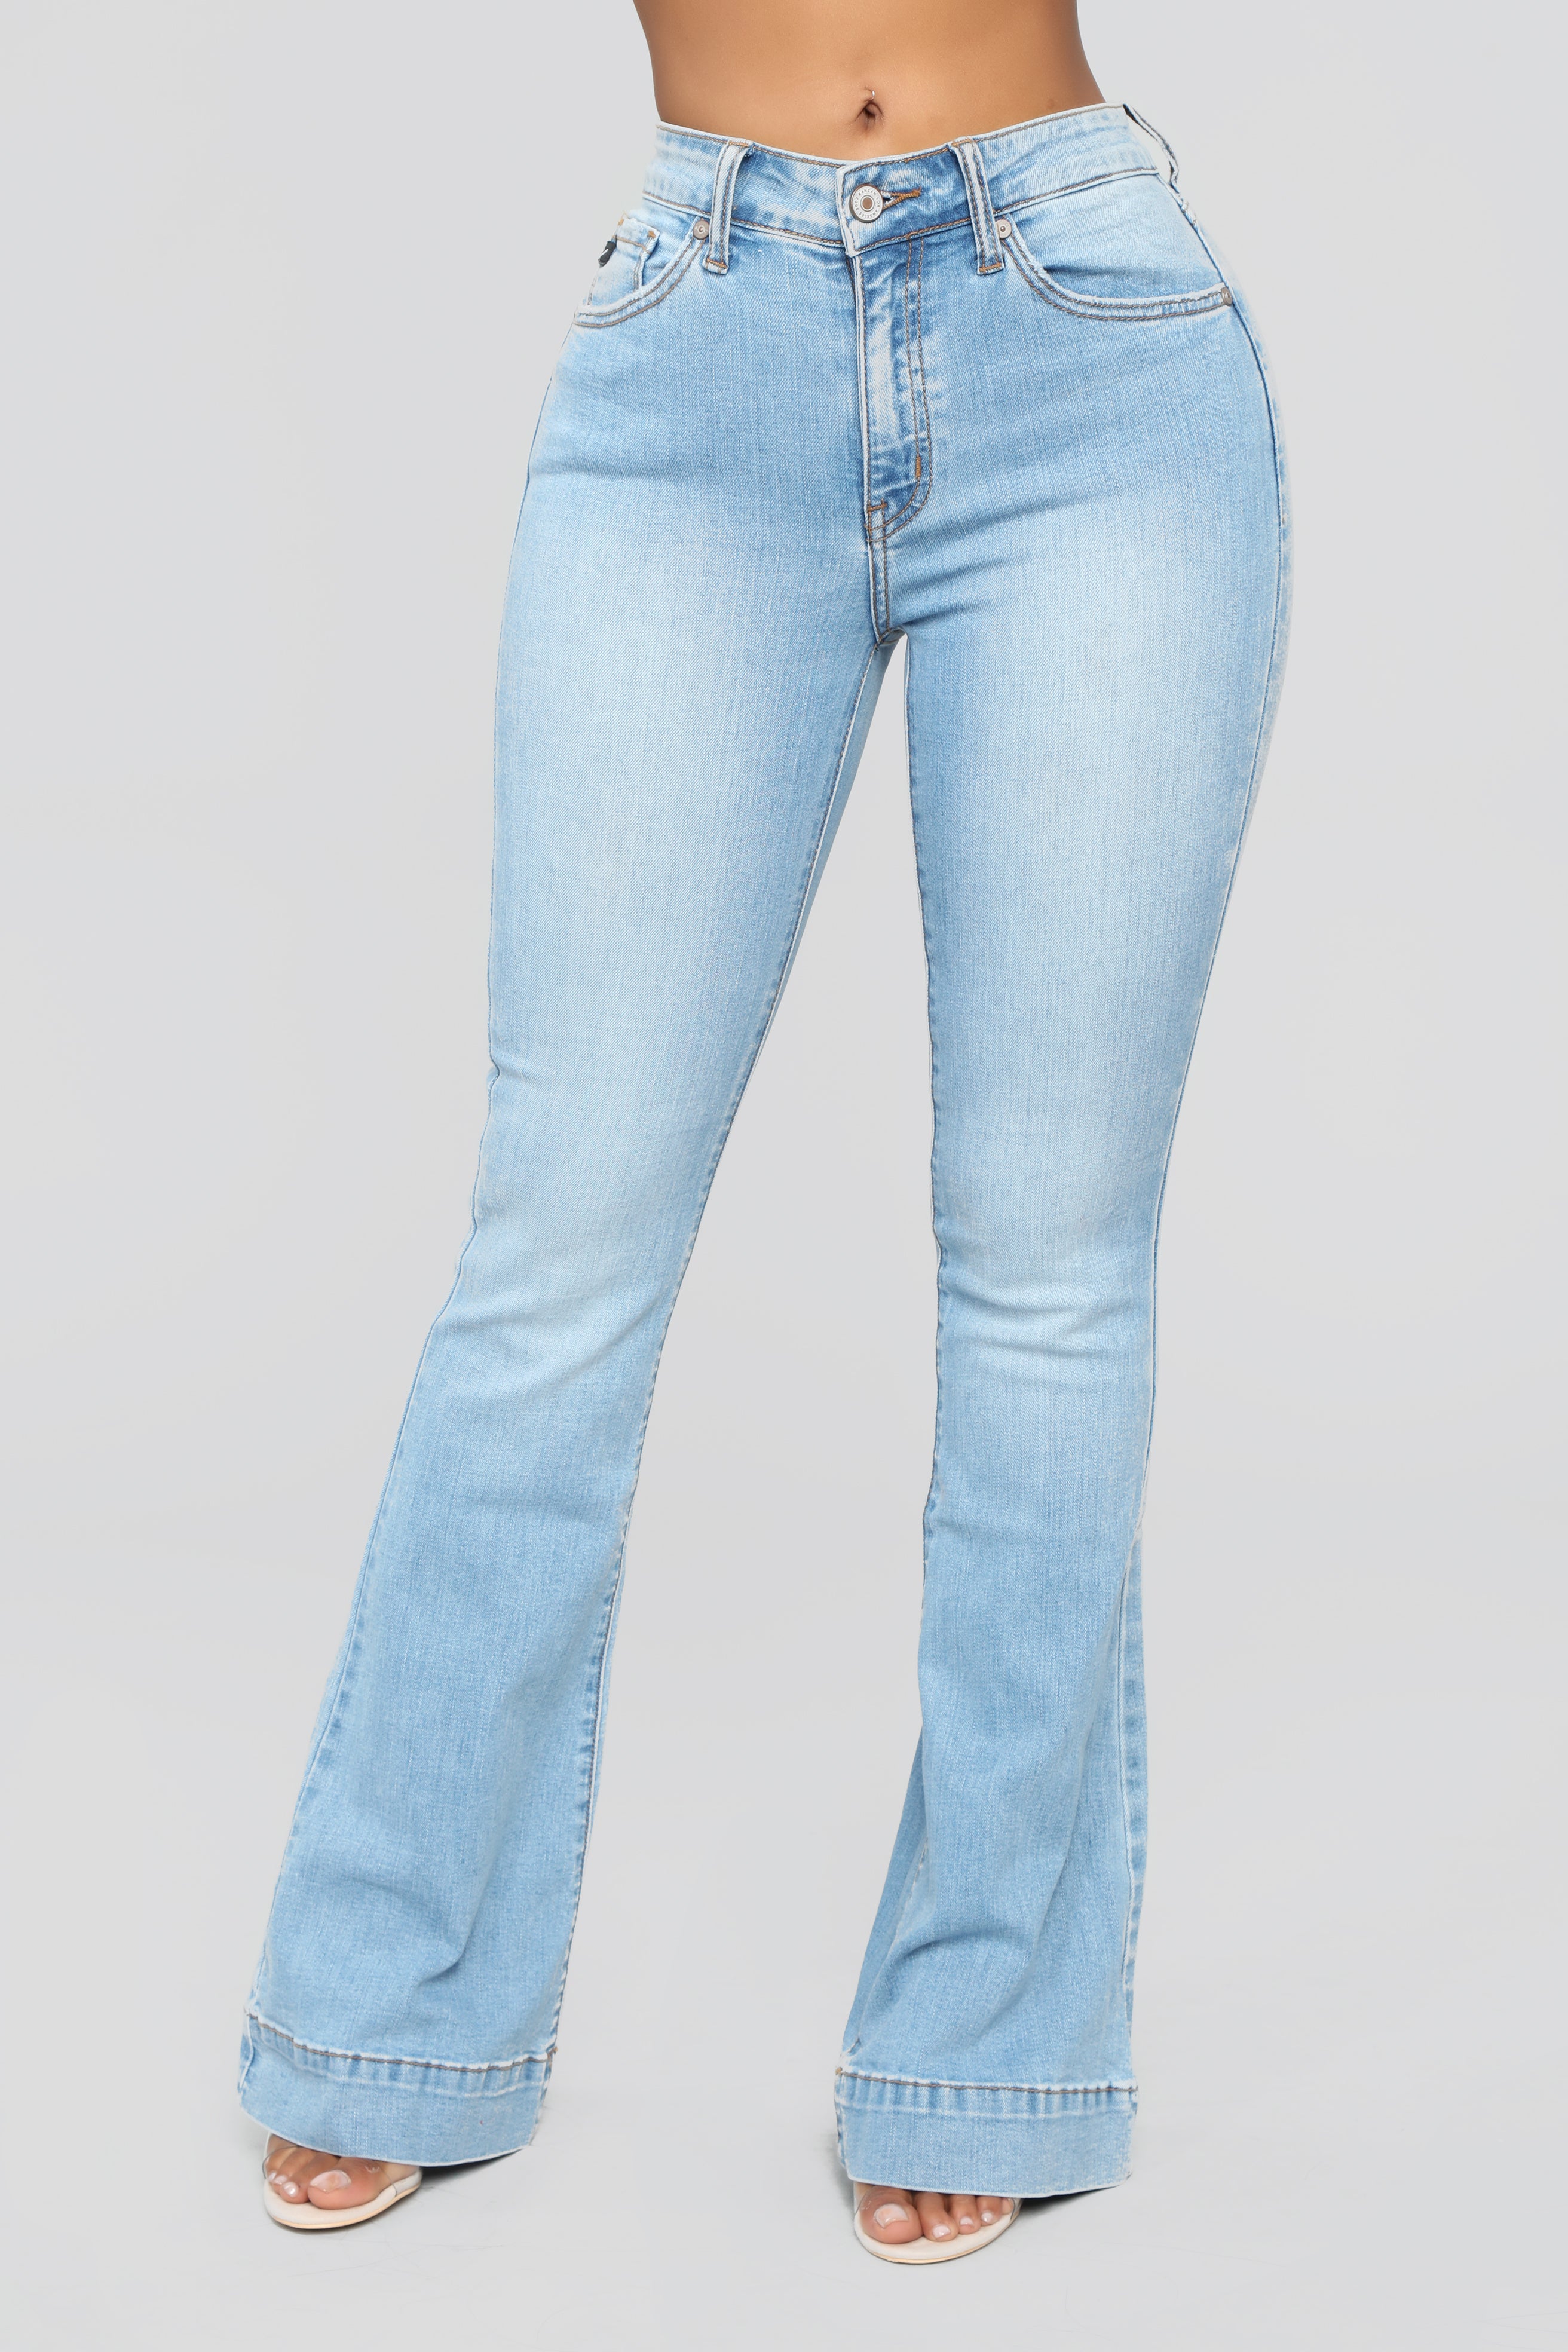 Push For It Flare Jeans - Light Blue Wash